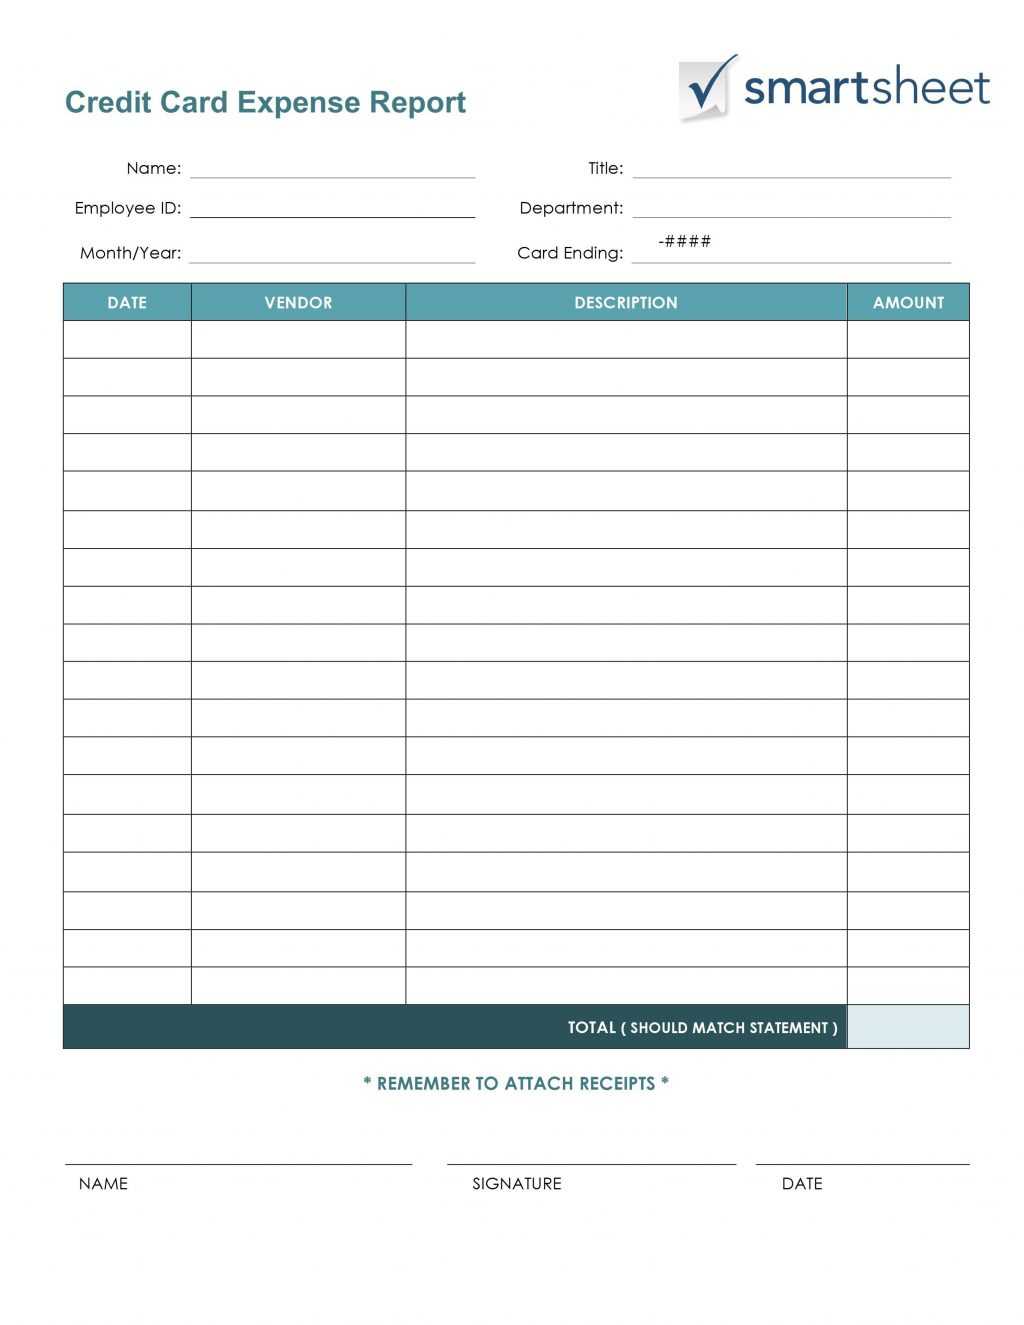 Credit Card Budget Spreadsheet Template Employee Expense For Expense Report Spreadsheet Template Excel